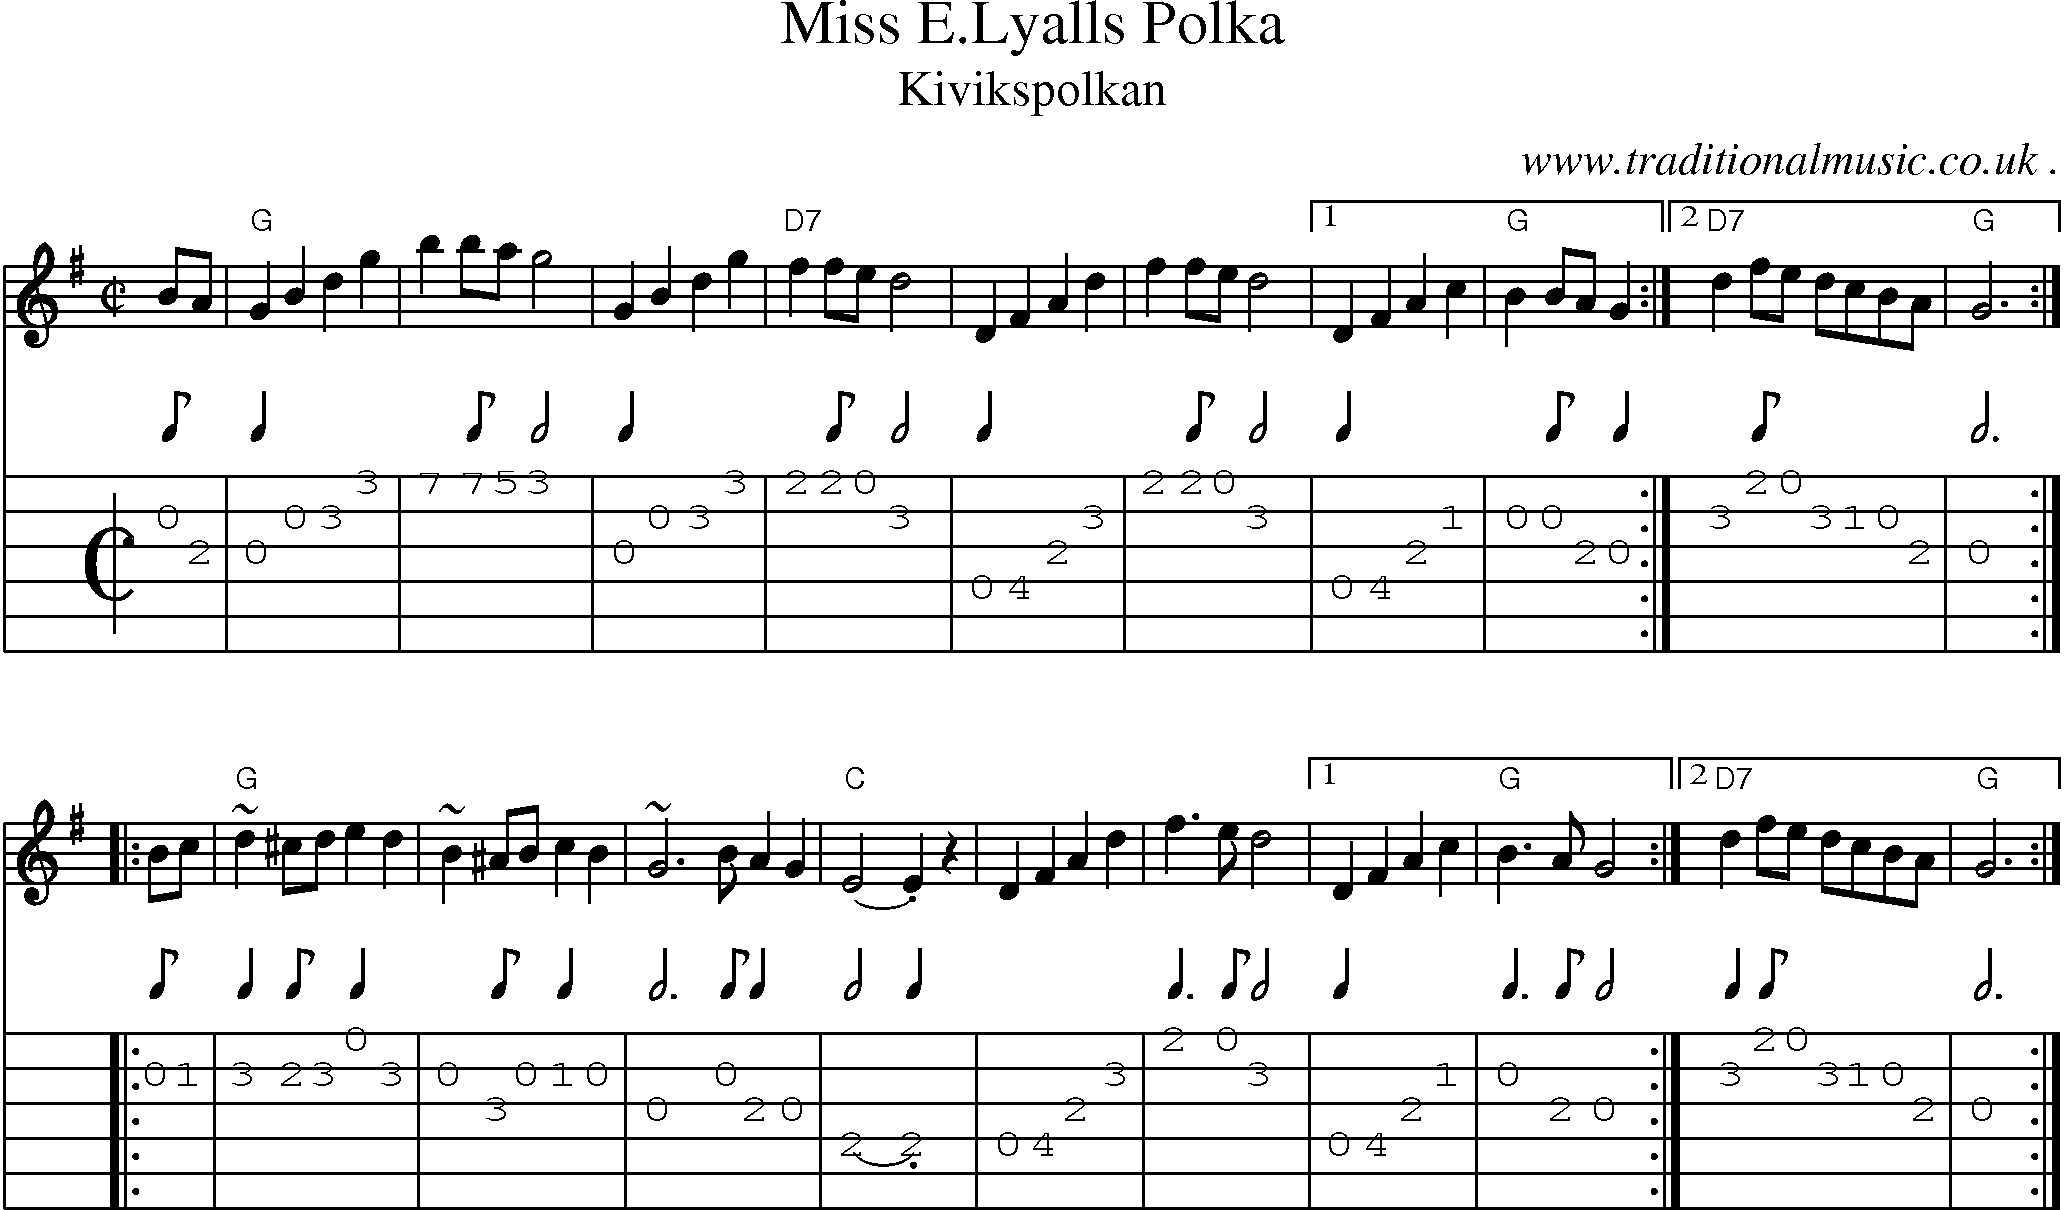 Sheet-music  score, Chords and Guitar Tabs for Miss Elyalls Polka